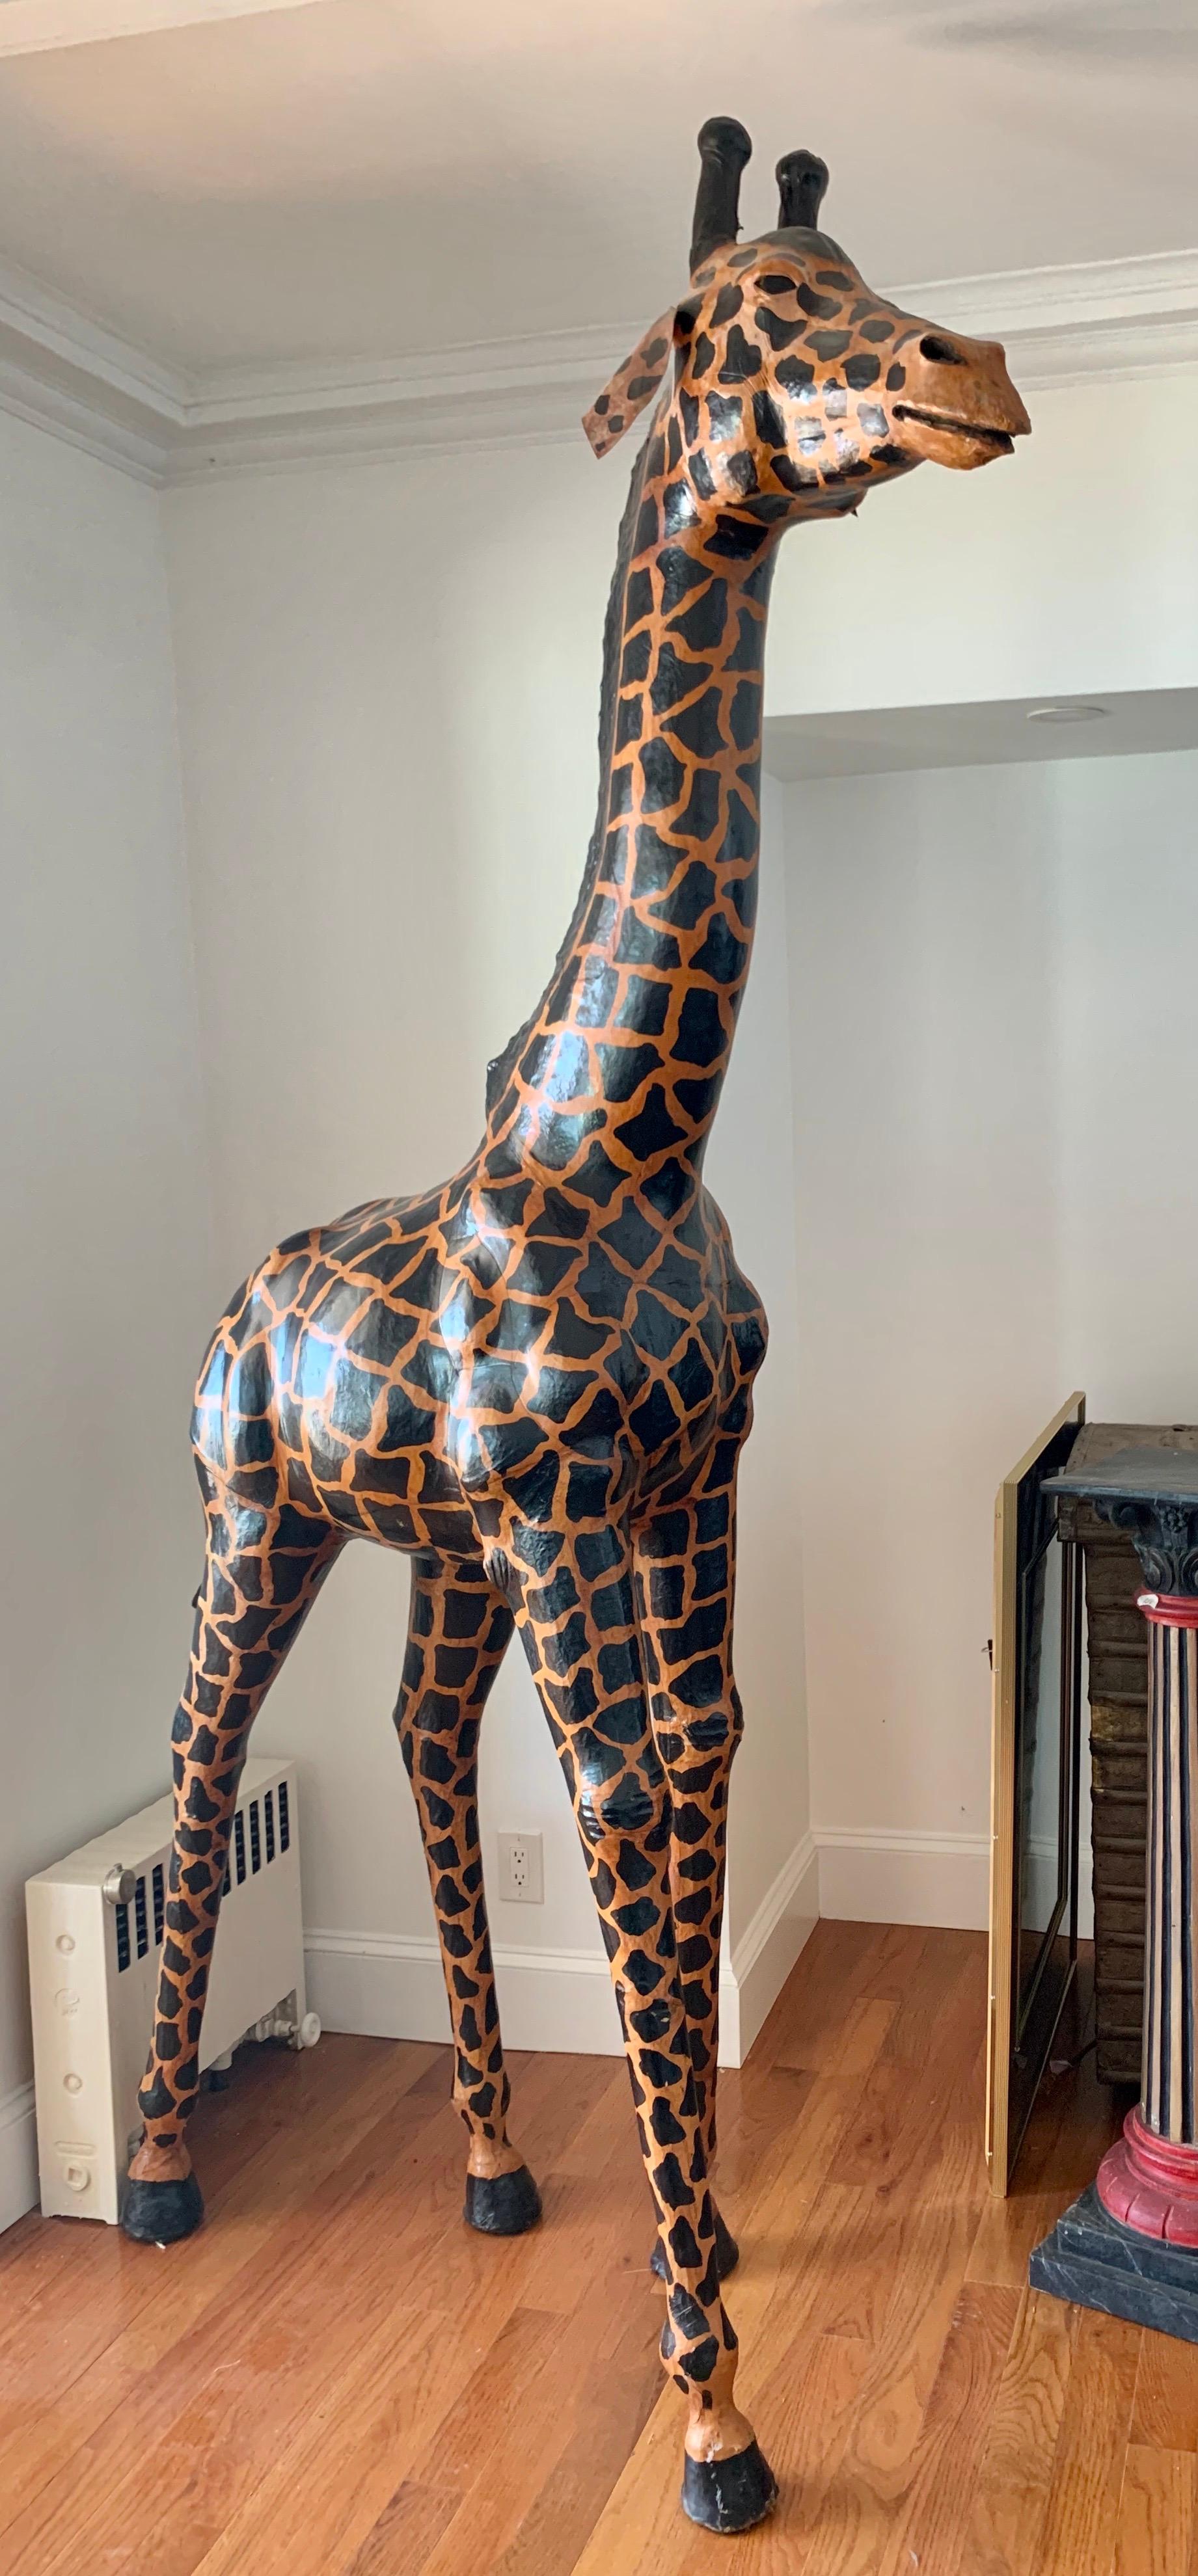 Large Life-Size Leather Giraffe Sculpture Almost Nine Feet Tall 12